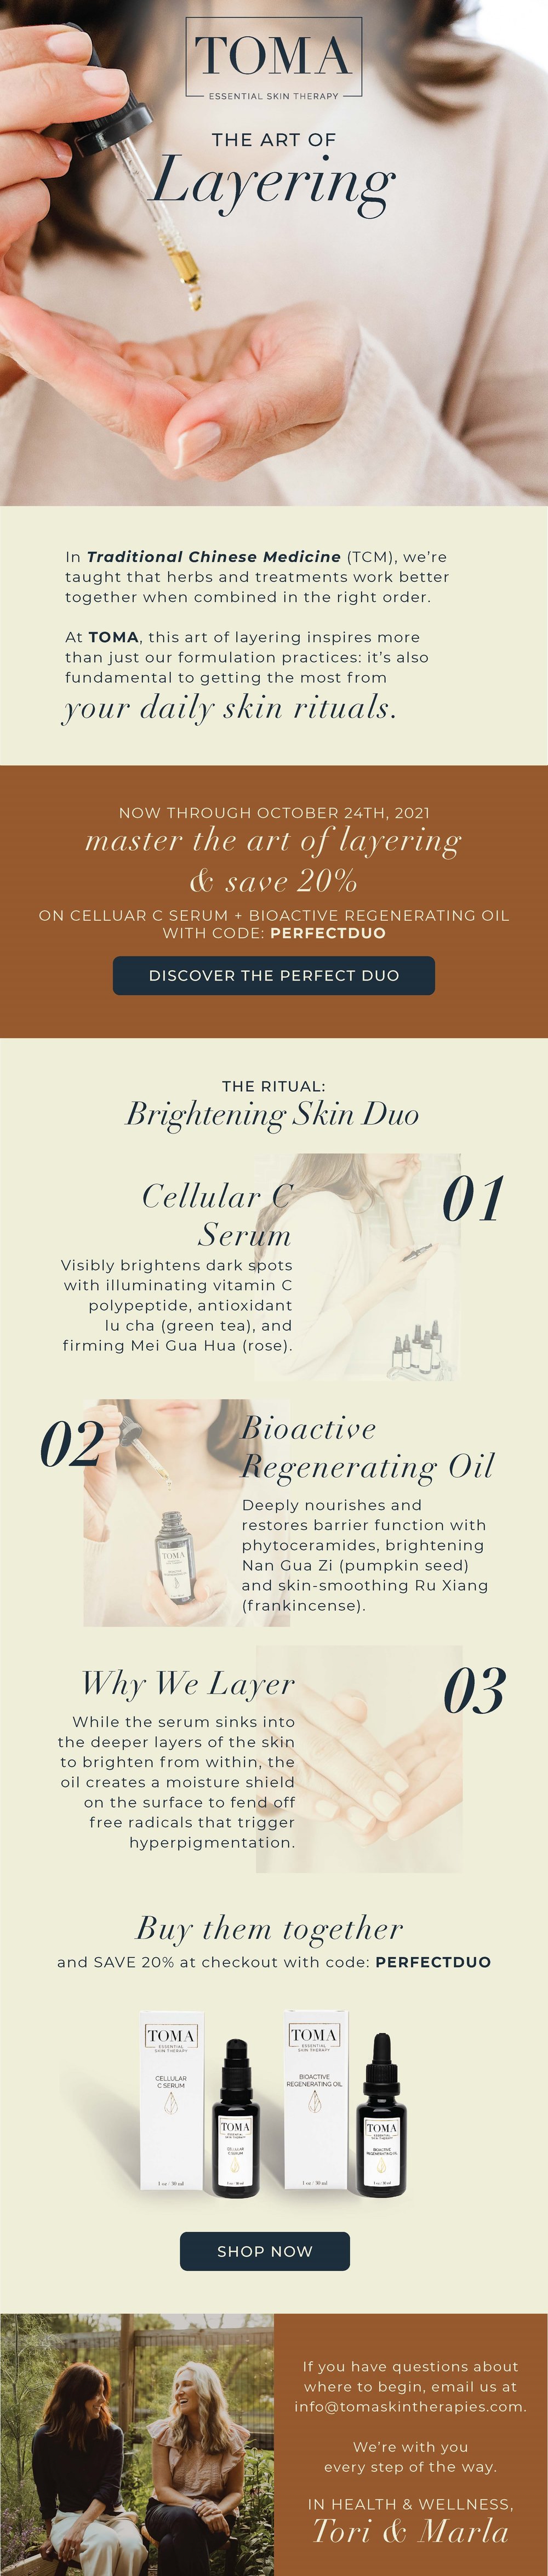 Toma Skin Therapies Email 10.20.2021 - 20% Off Perfect Duo.jpg